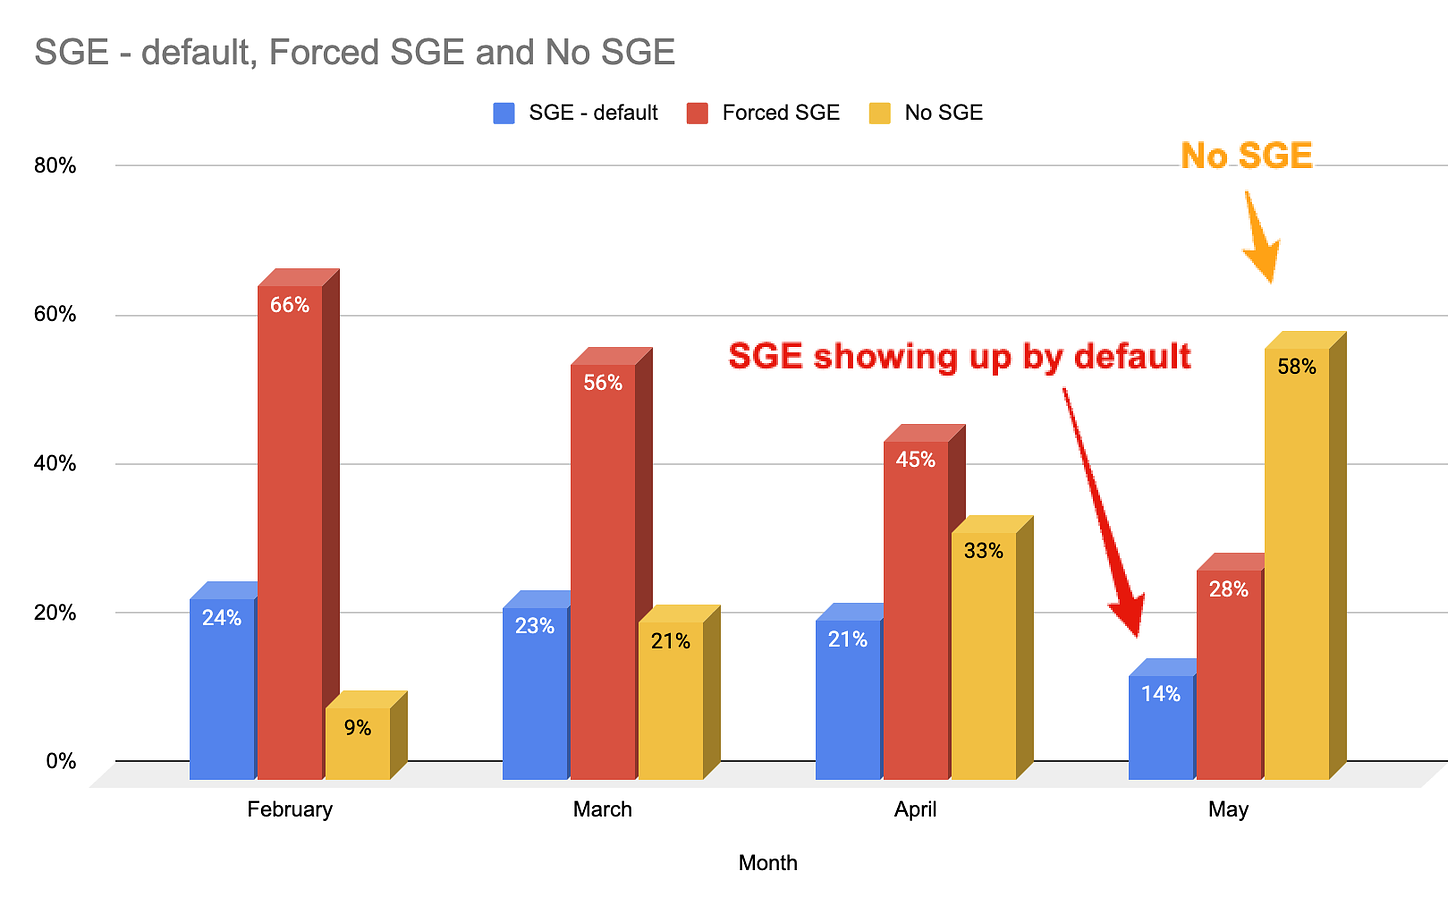 SGE is less prominent and part of fewer search results in recent months